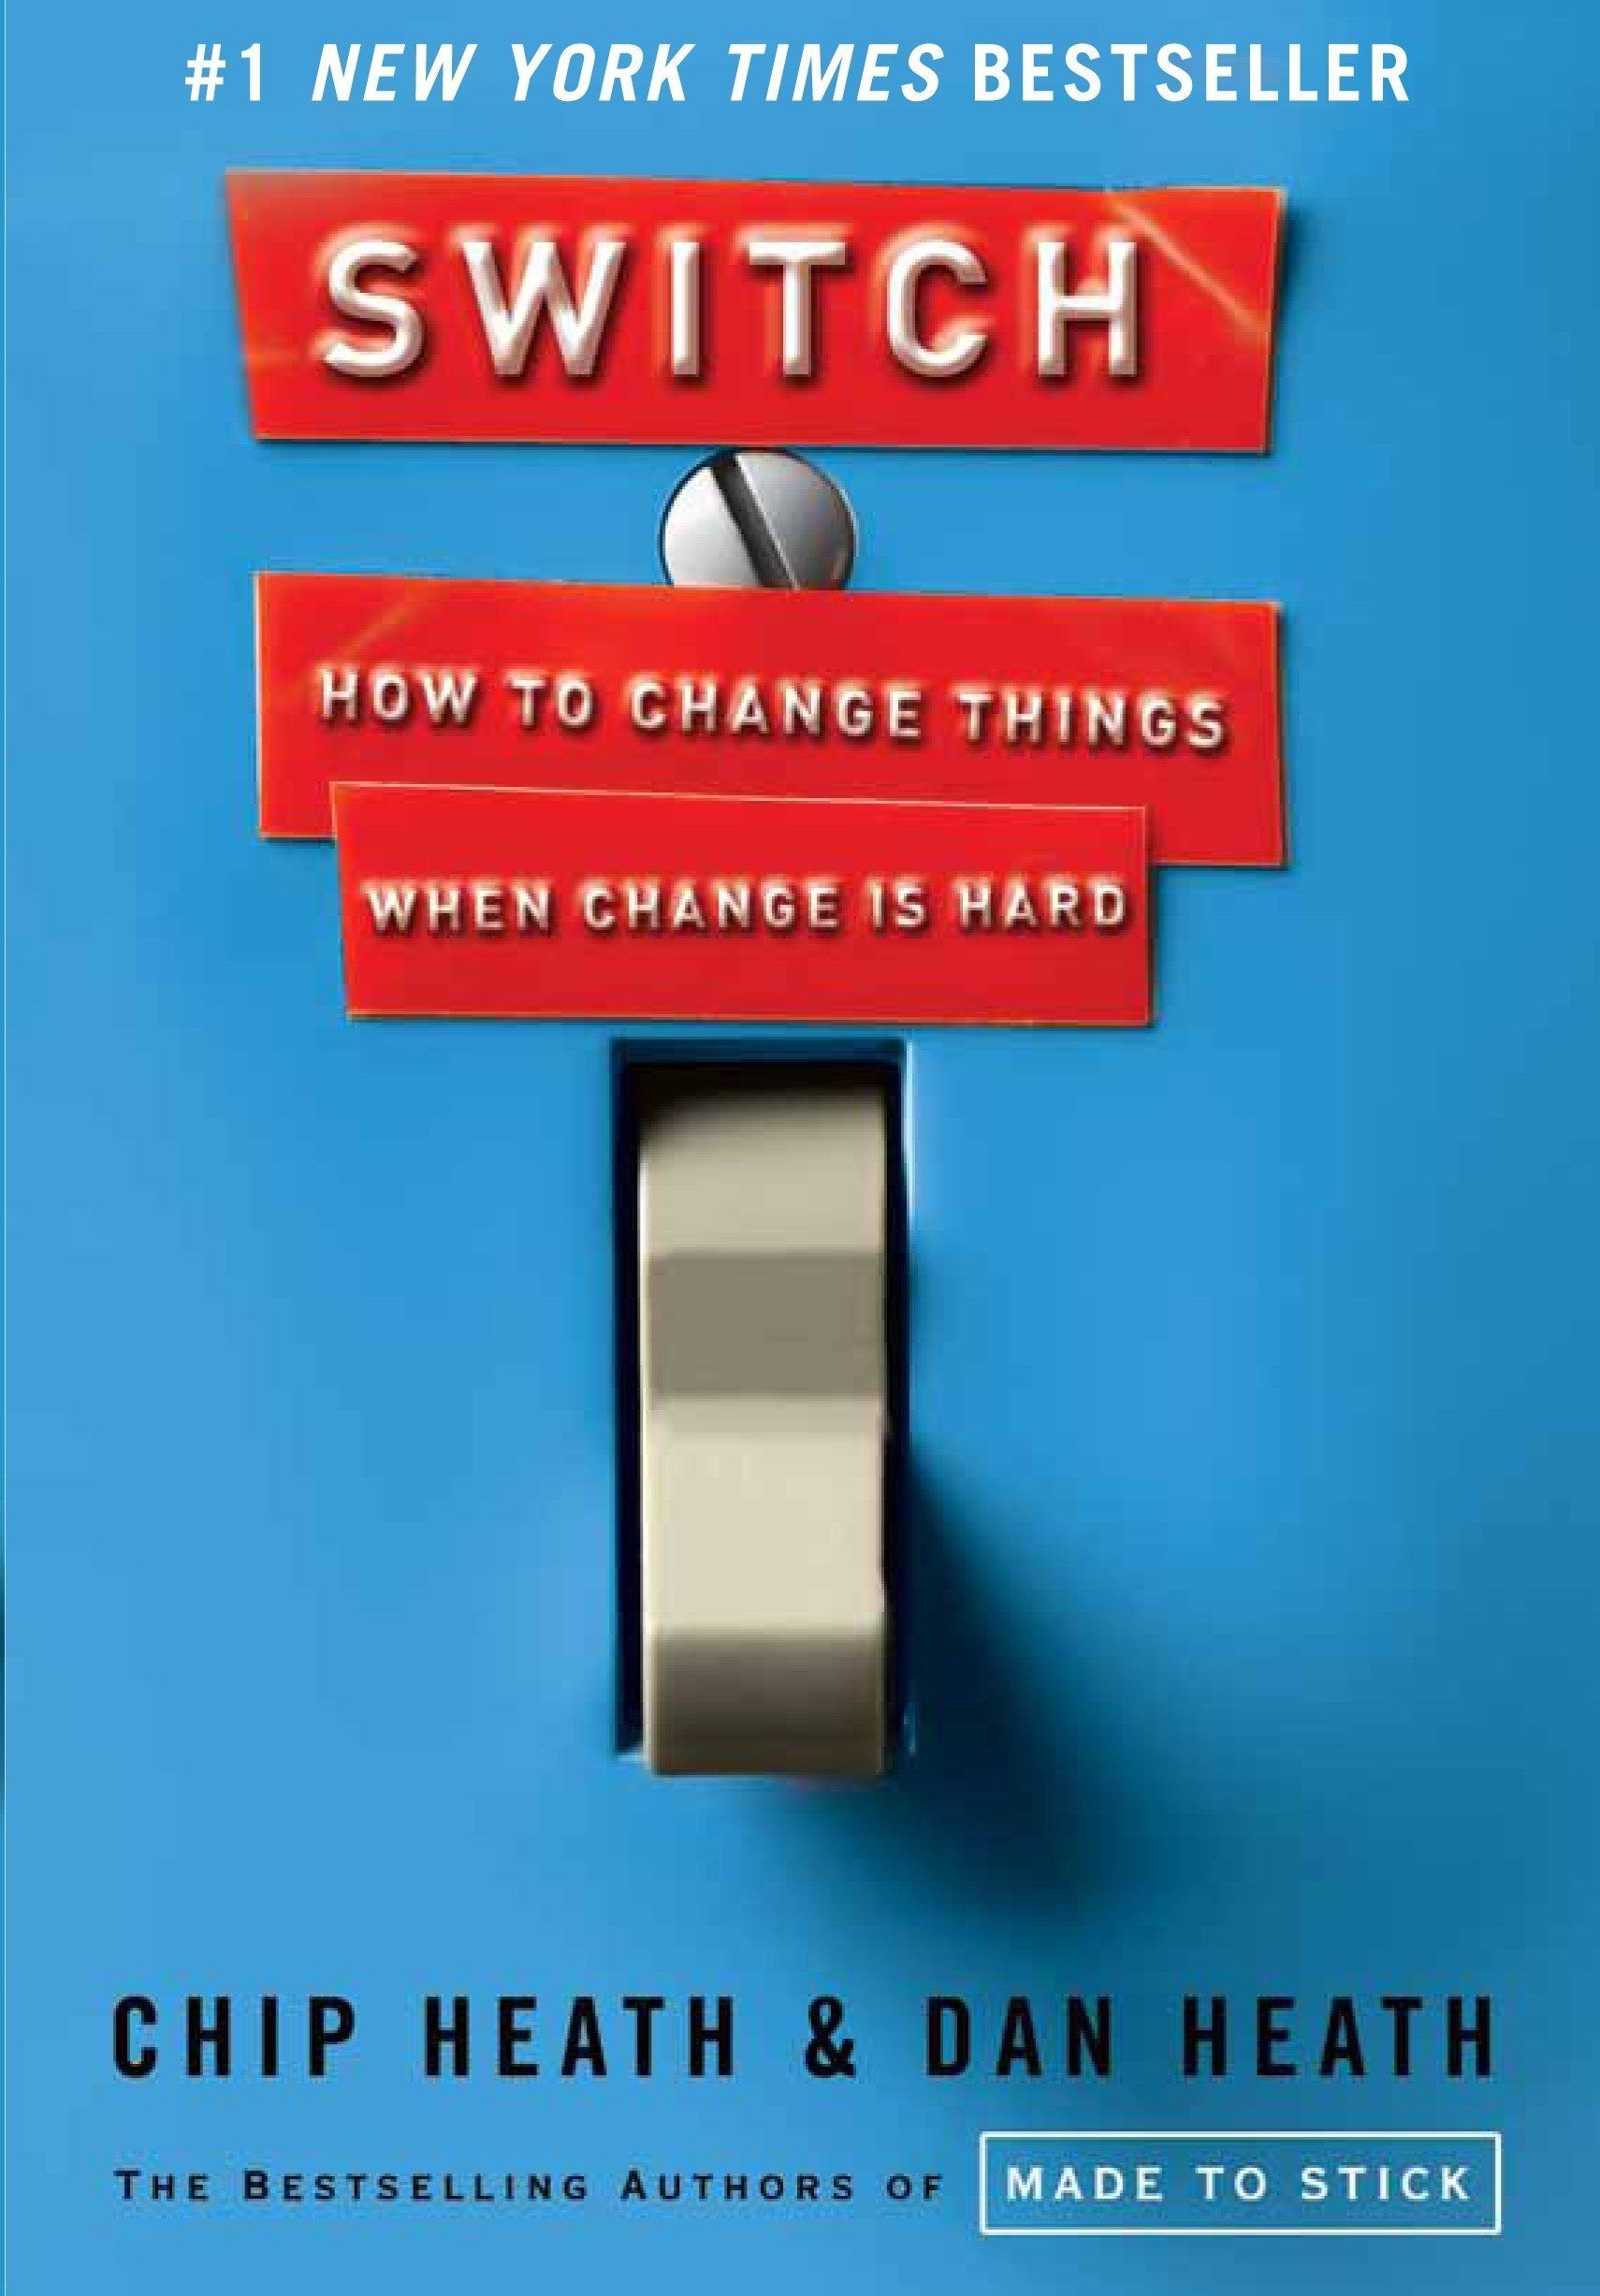 The cover of Switch by Chip and Dan Heath